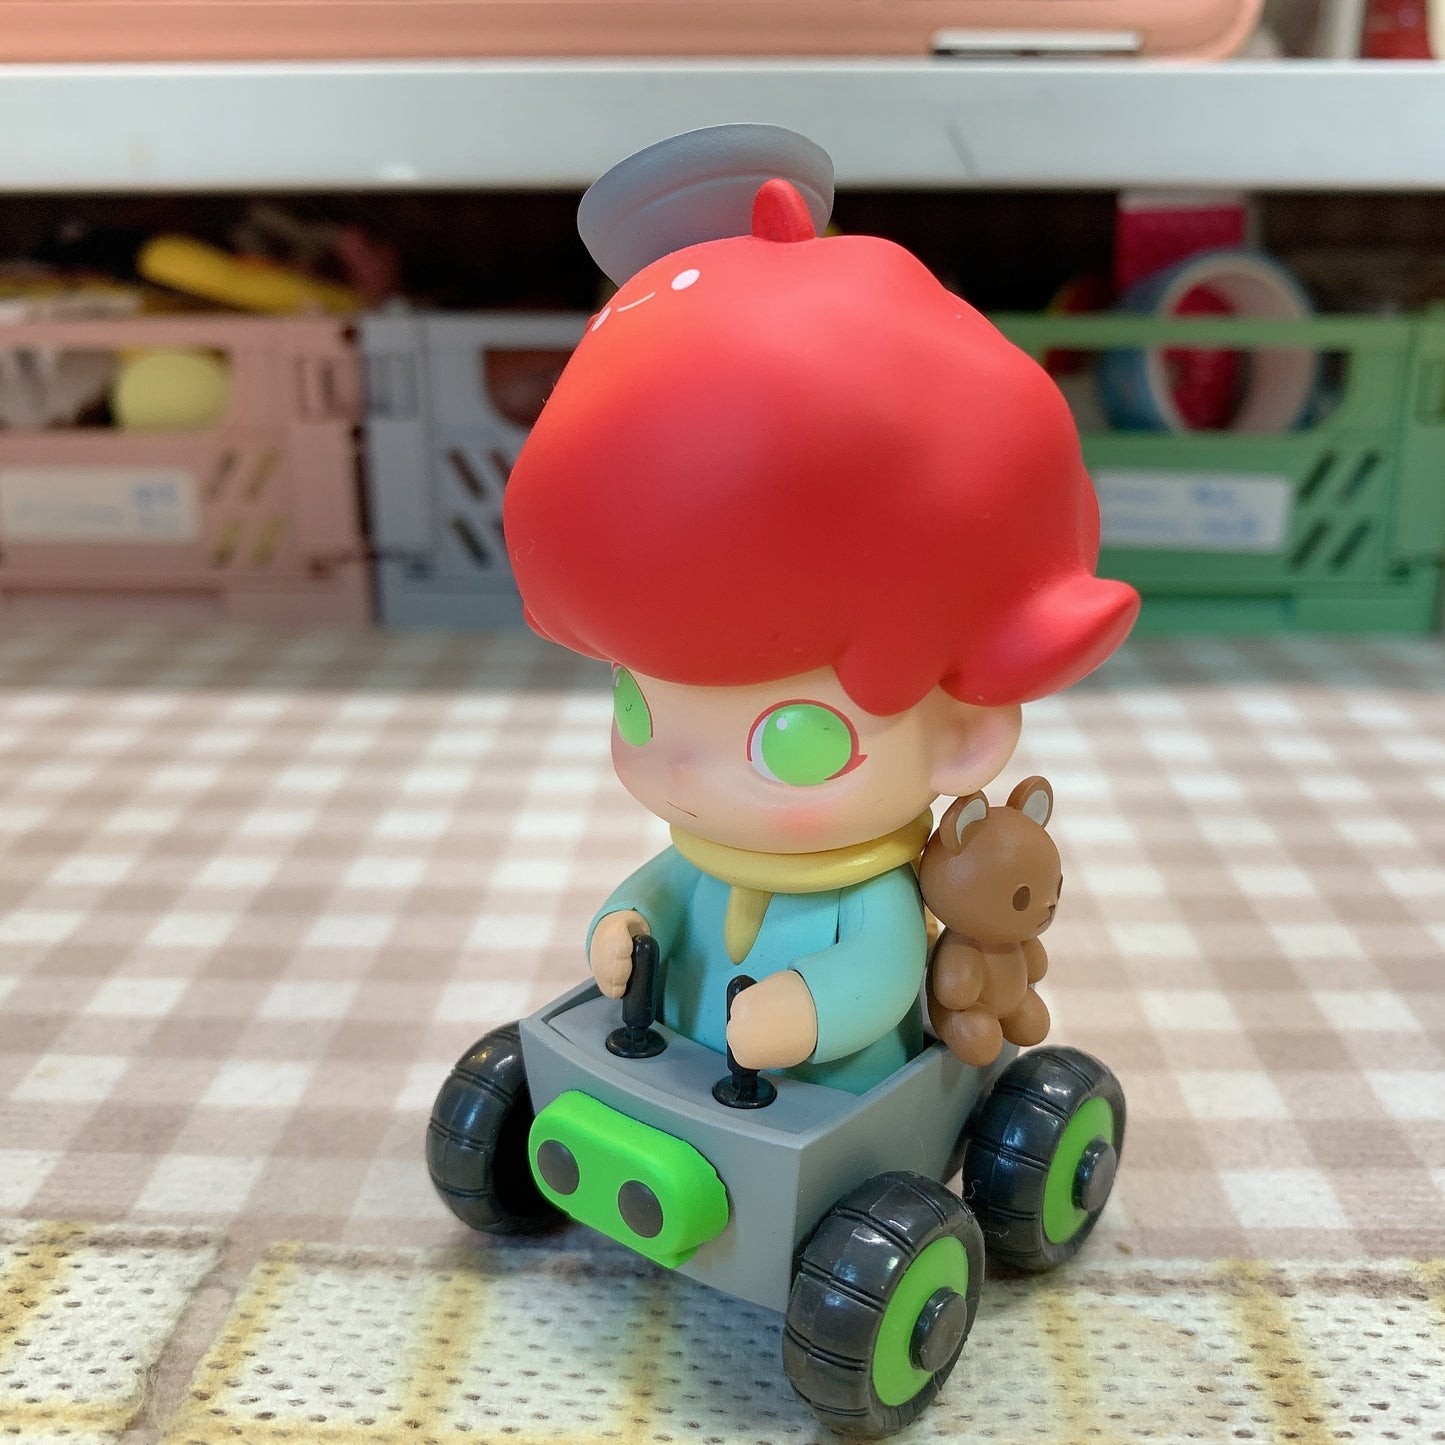 【PRELOVED and SALE 】POPMART Dimoo blind box toy Space Travel series Explorer